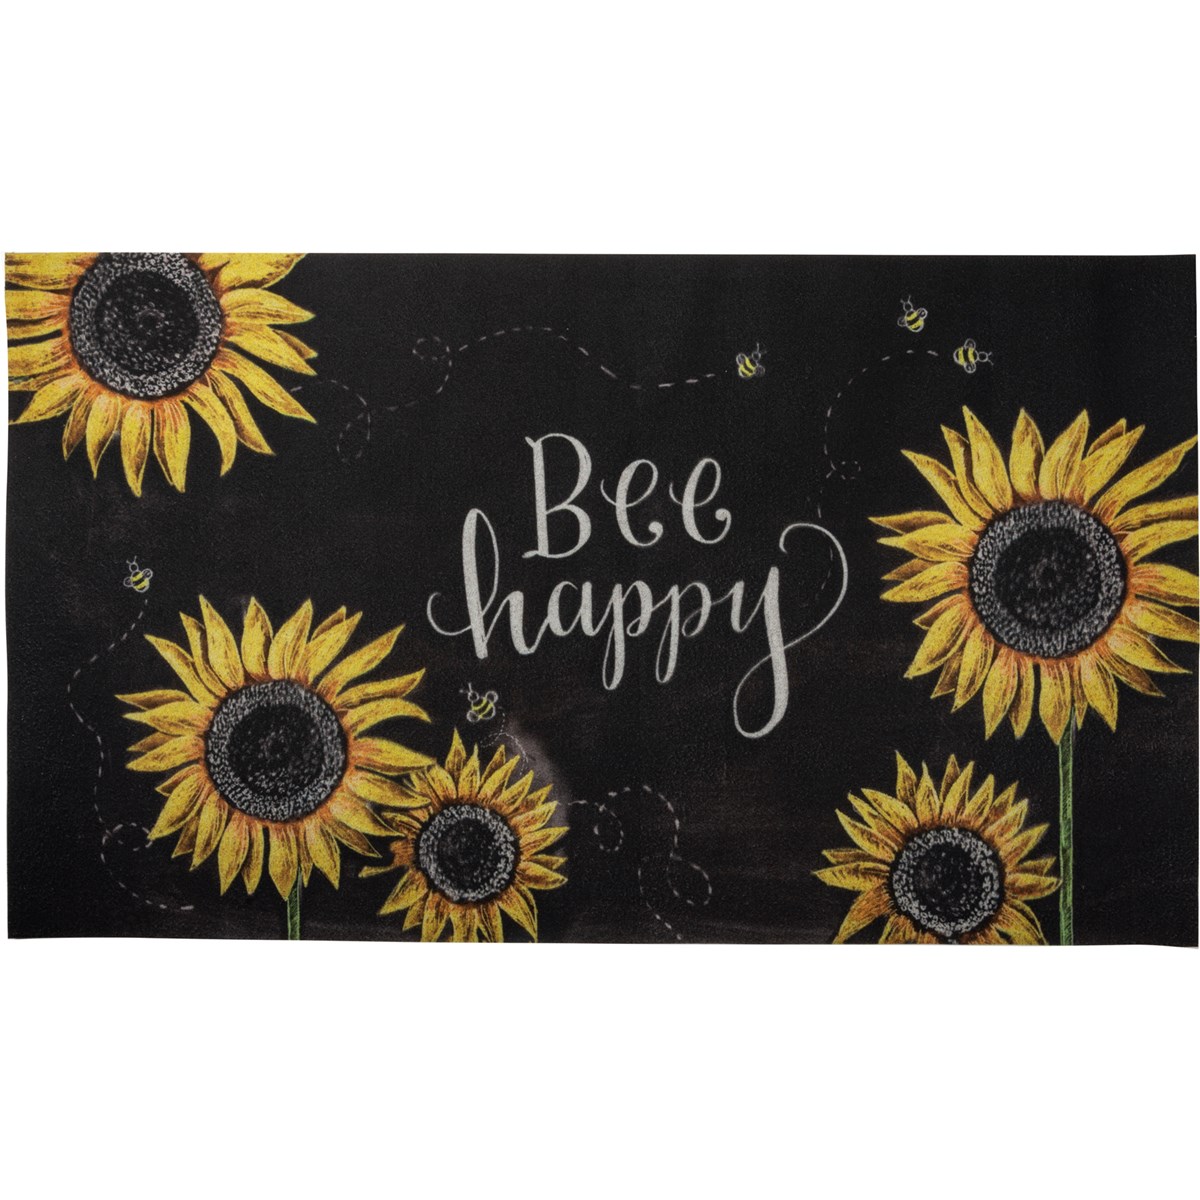 Bee Happy Rug - Polyester, PVC skid-resistant backing